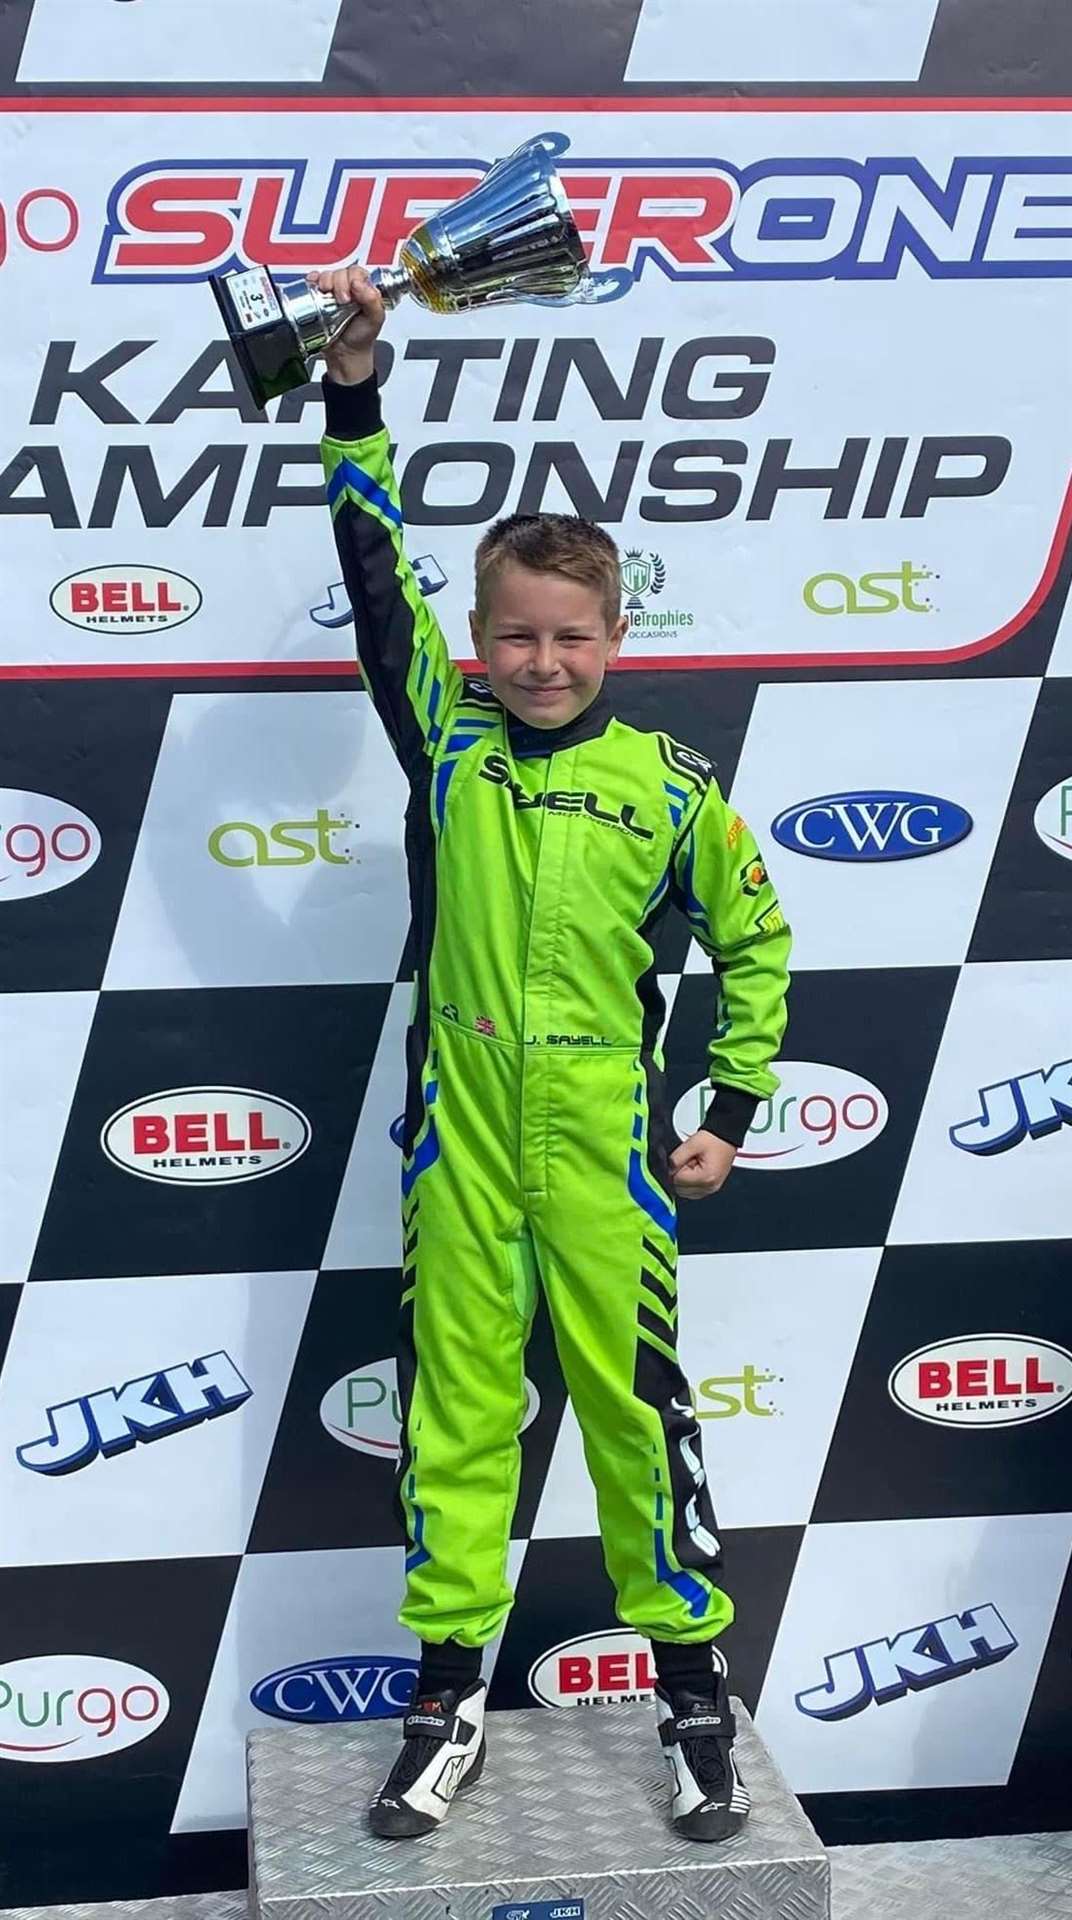 Jenson Sayell took second and third place trophies at the weekend.